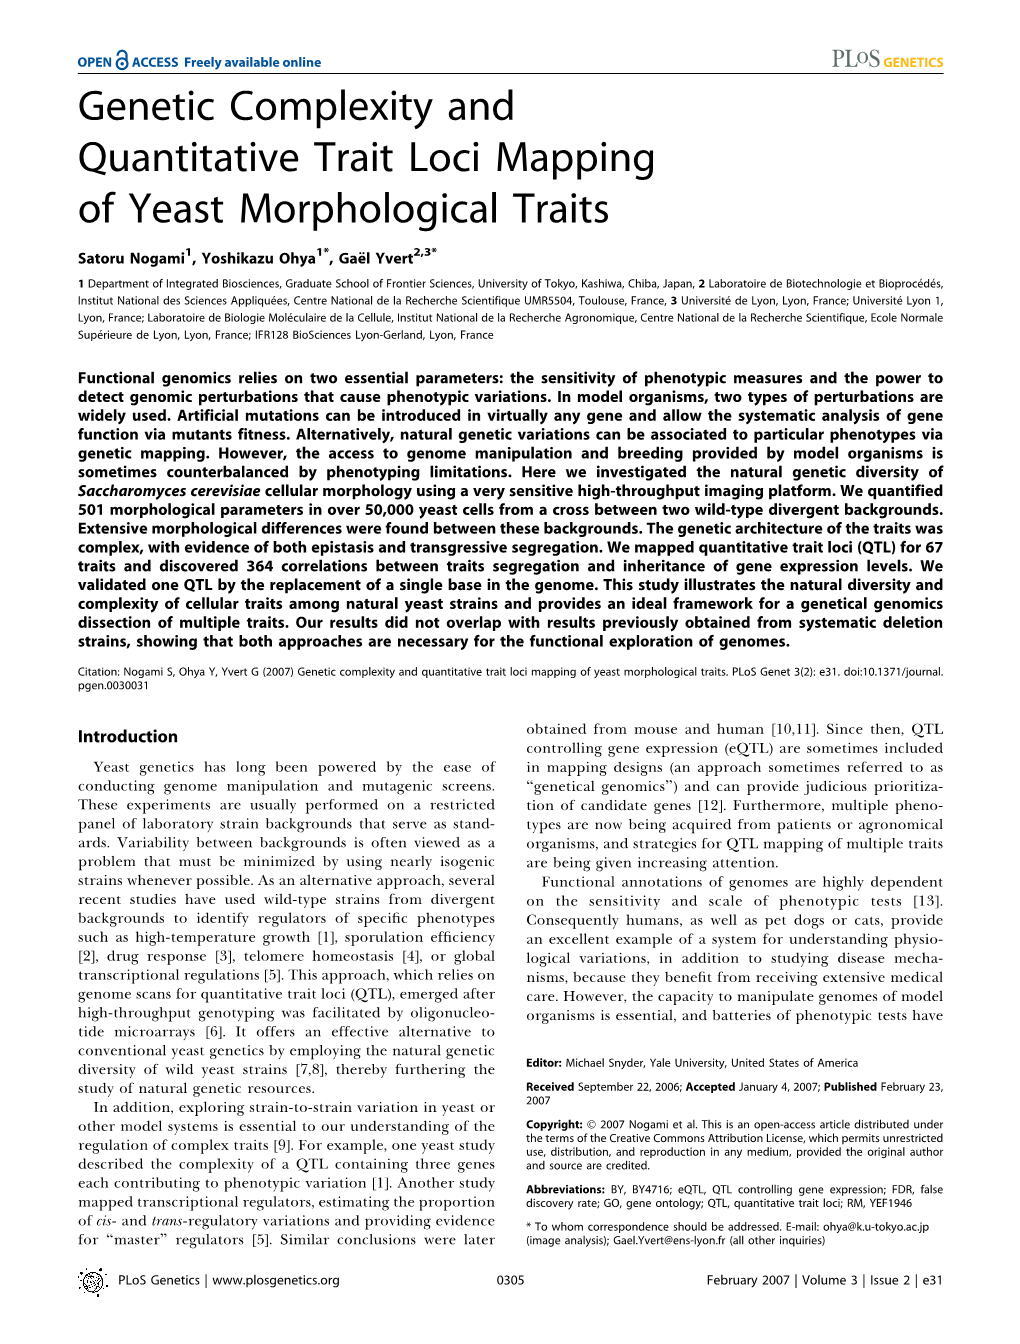 Genetic Complexity and Quantitative Trait Loci Mapping of Yeast Morphological Traits